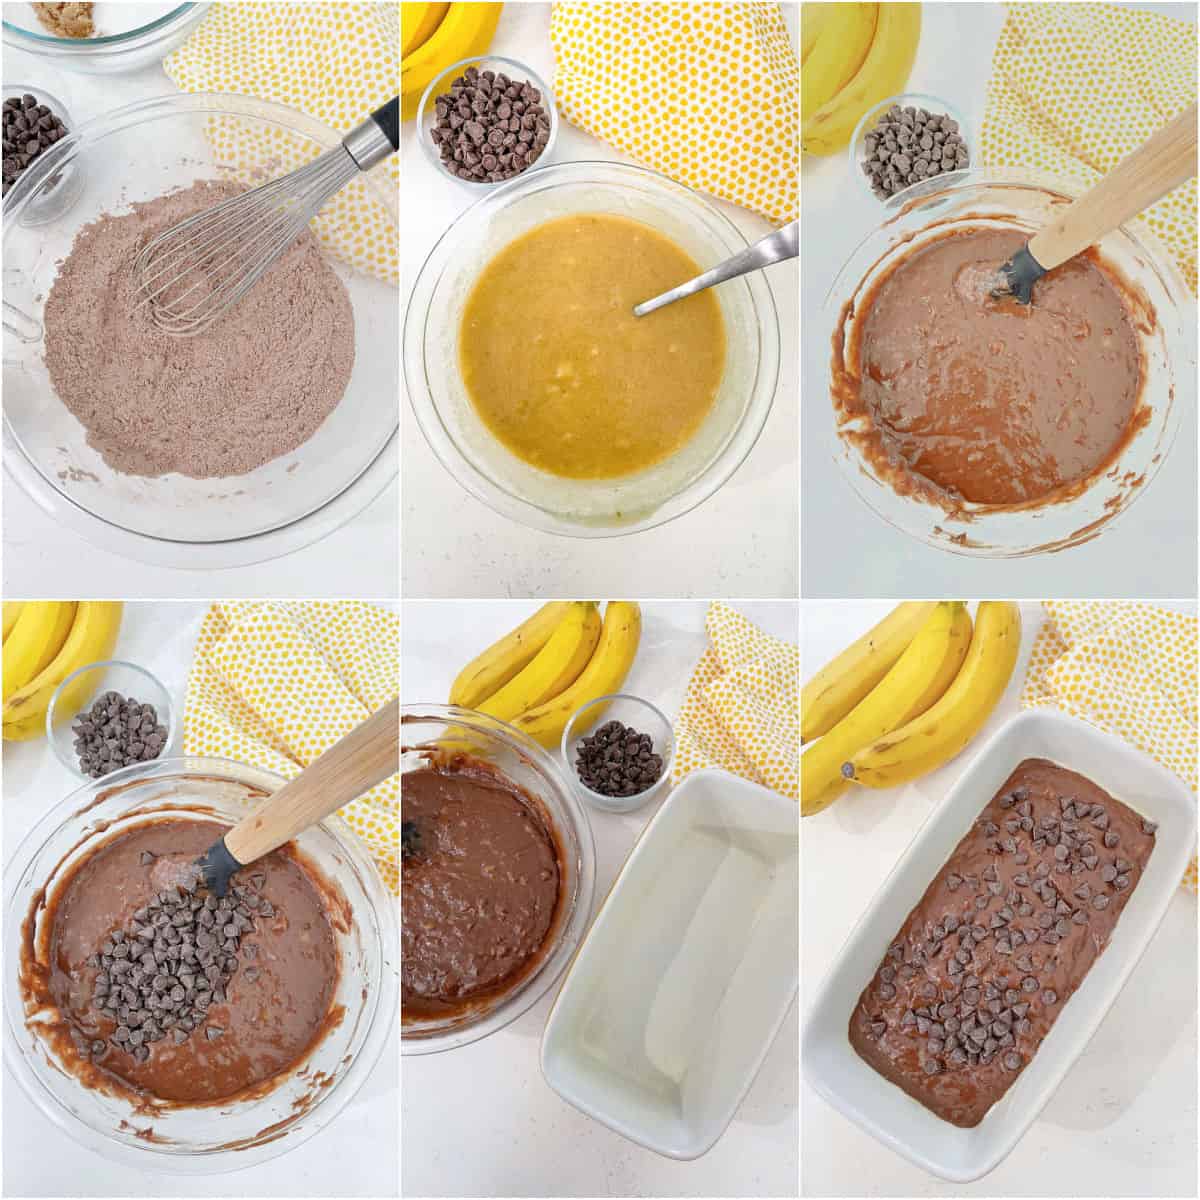 Step by step images of making double chocolate banana bread.